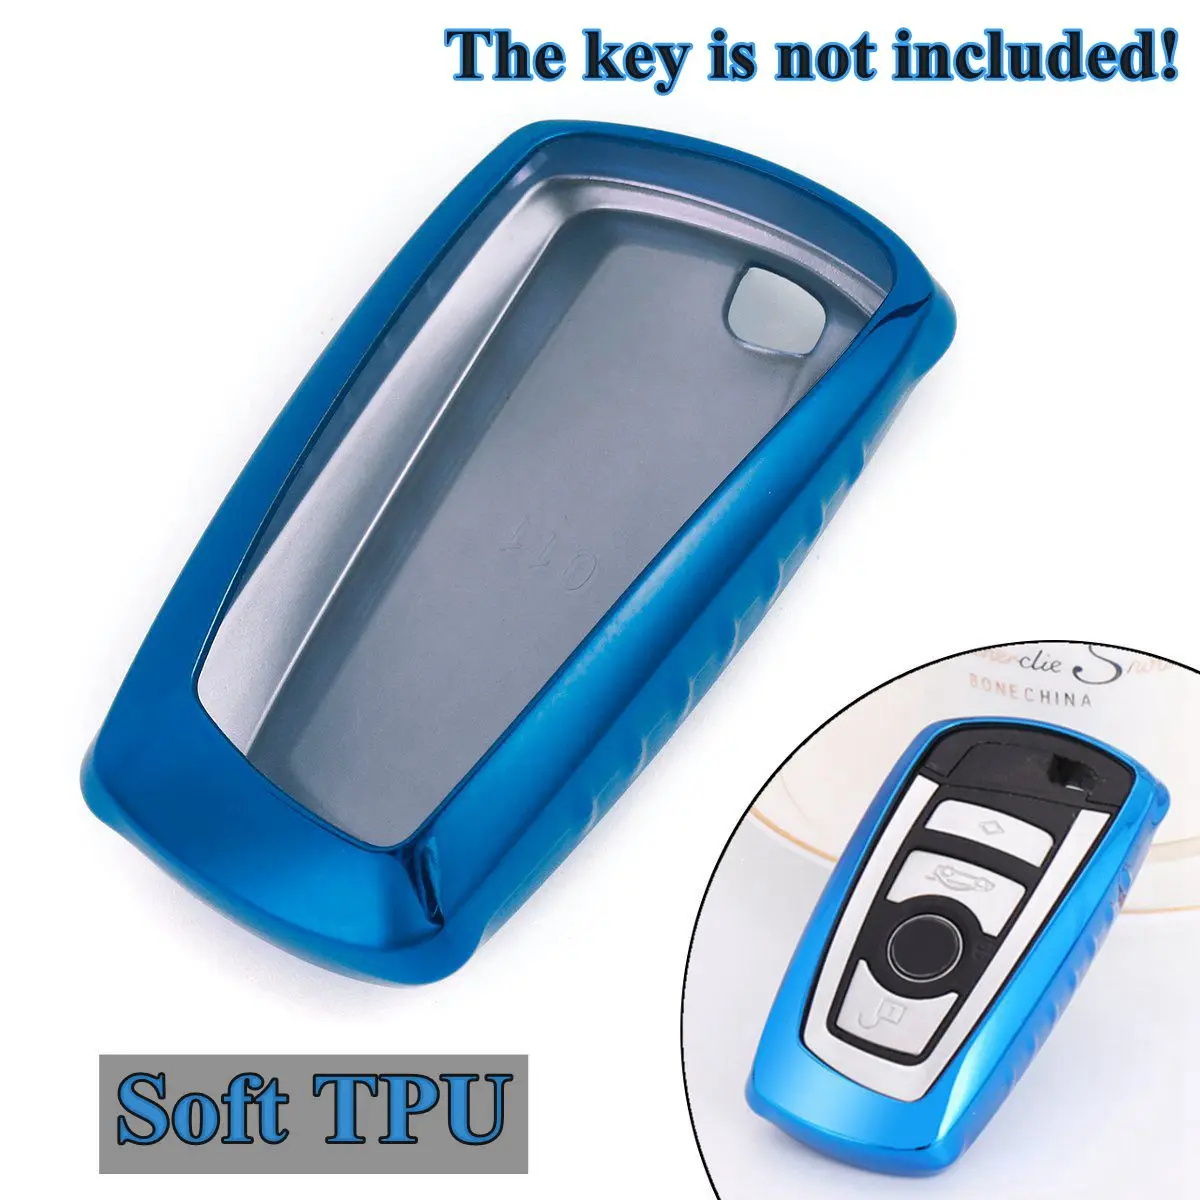 Car Styling TPU Key Cover Case Fit for BMW 1 3 5 7 Series E30 E34 E36 E39 E46 F10 F11 F31 G30 M Performance X1 F48 X3 X4 X5 | Автомобили и